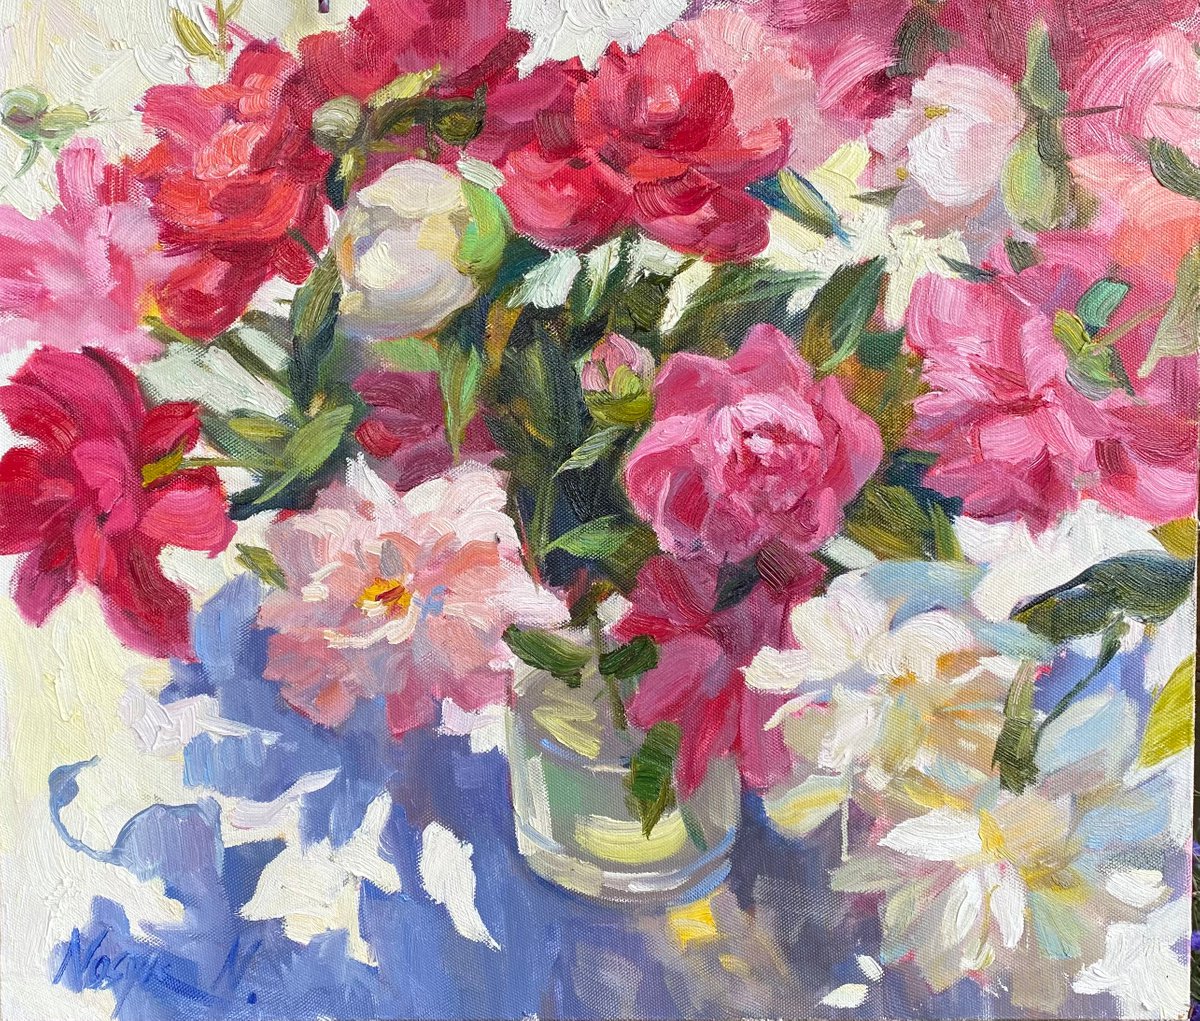 Peonies at afternoon | oil painting on canvas flowers by Nataliia Nosyk